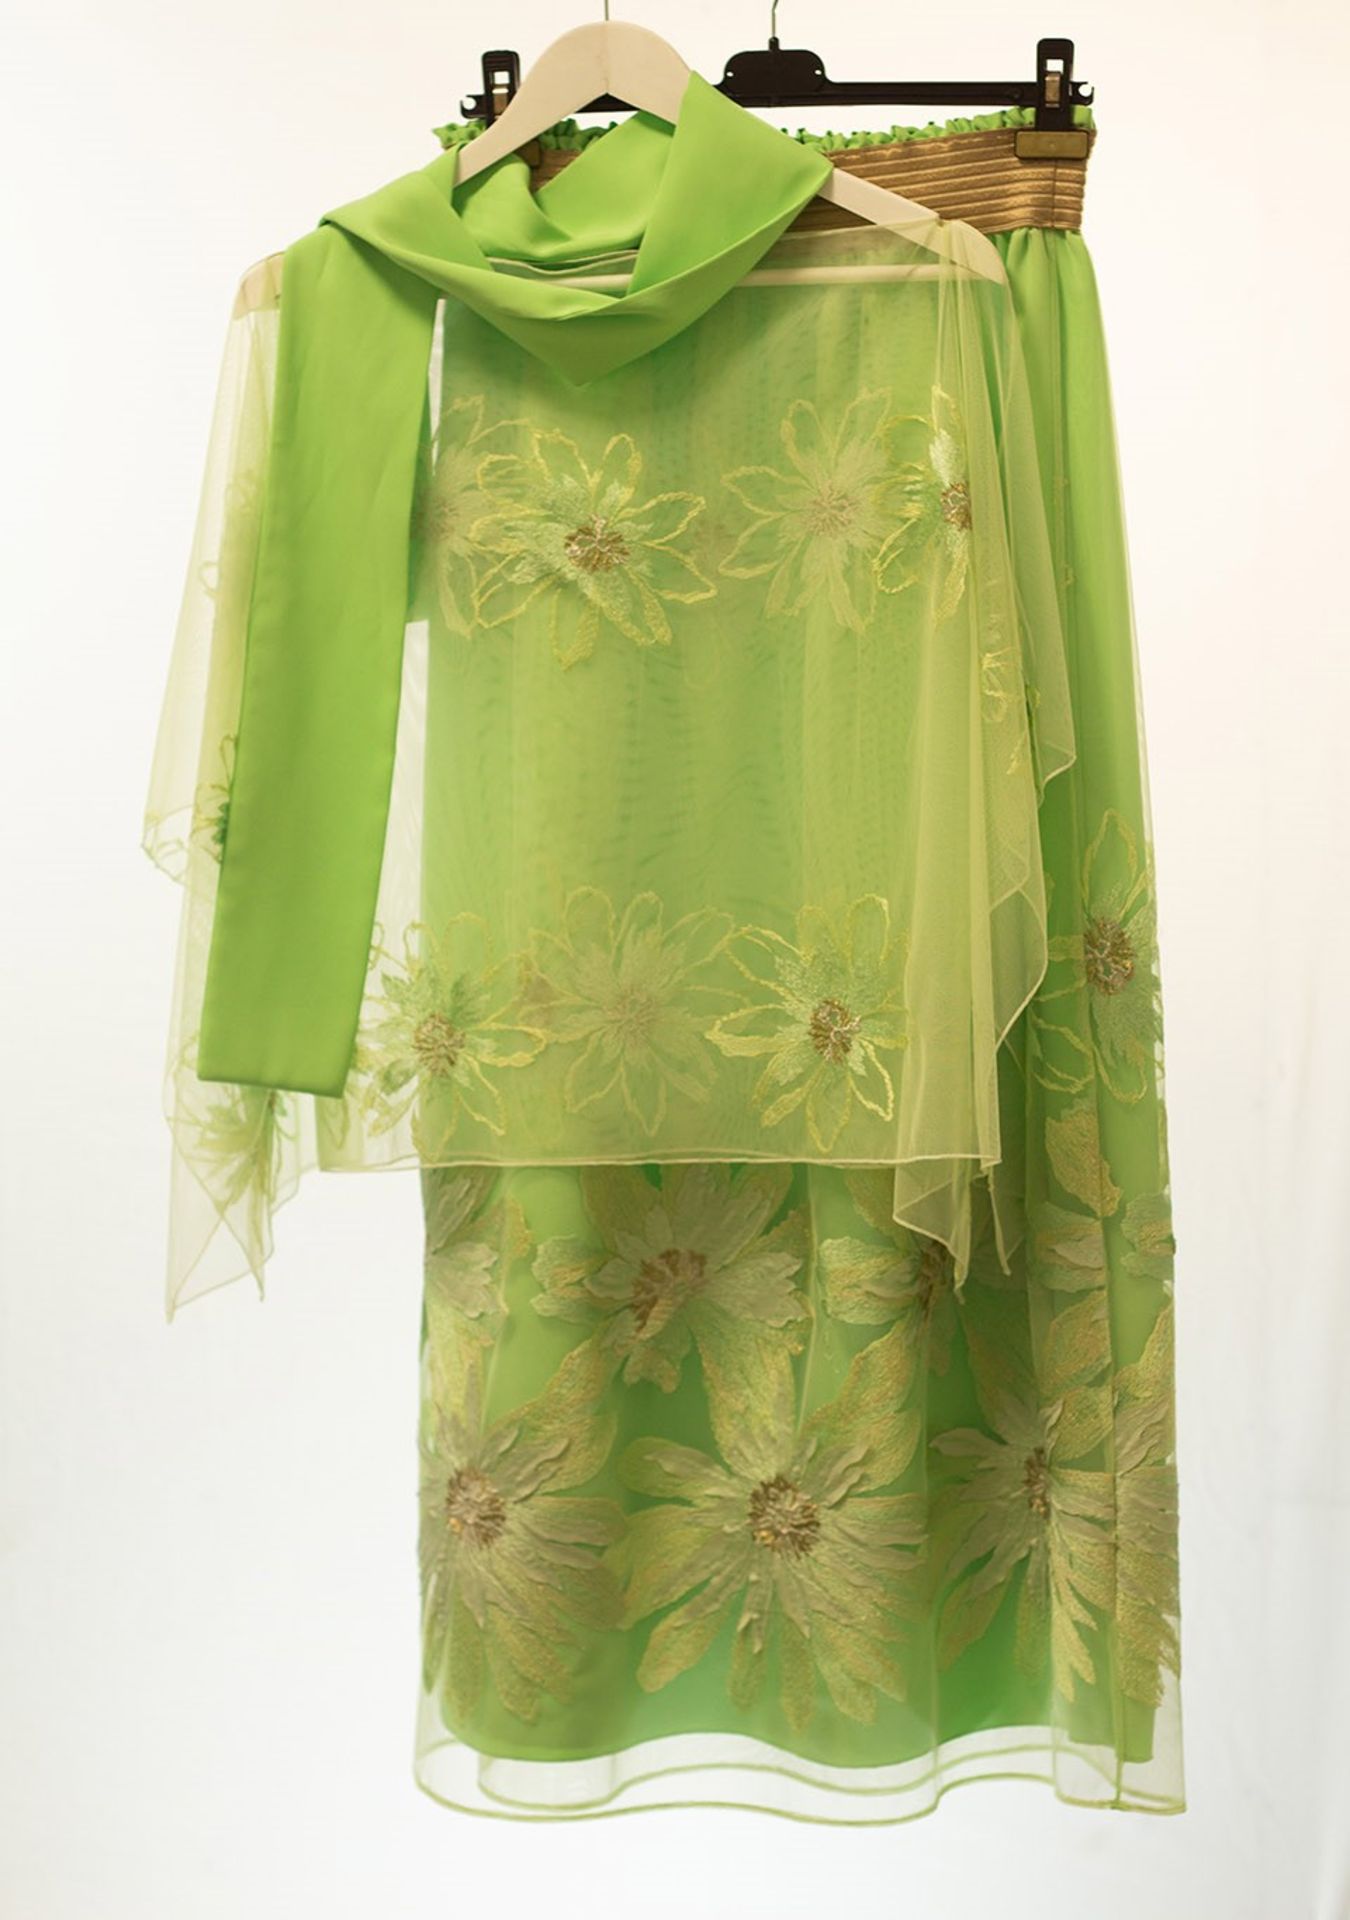 1 x Boutique Le Duc Green Skirt With Matching Scarf And Shawl - Size: 8 - Material: 100% Silk - From